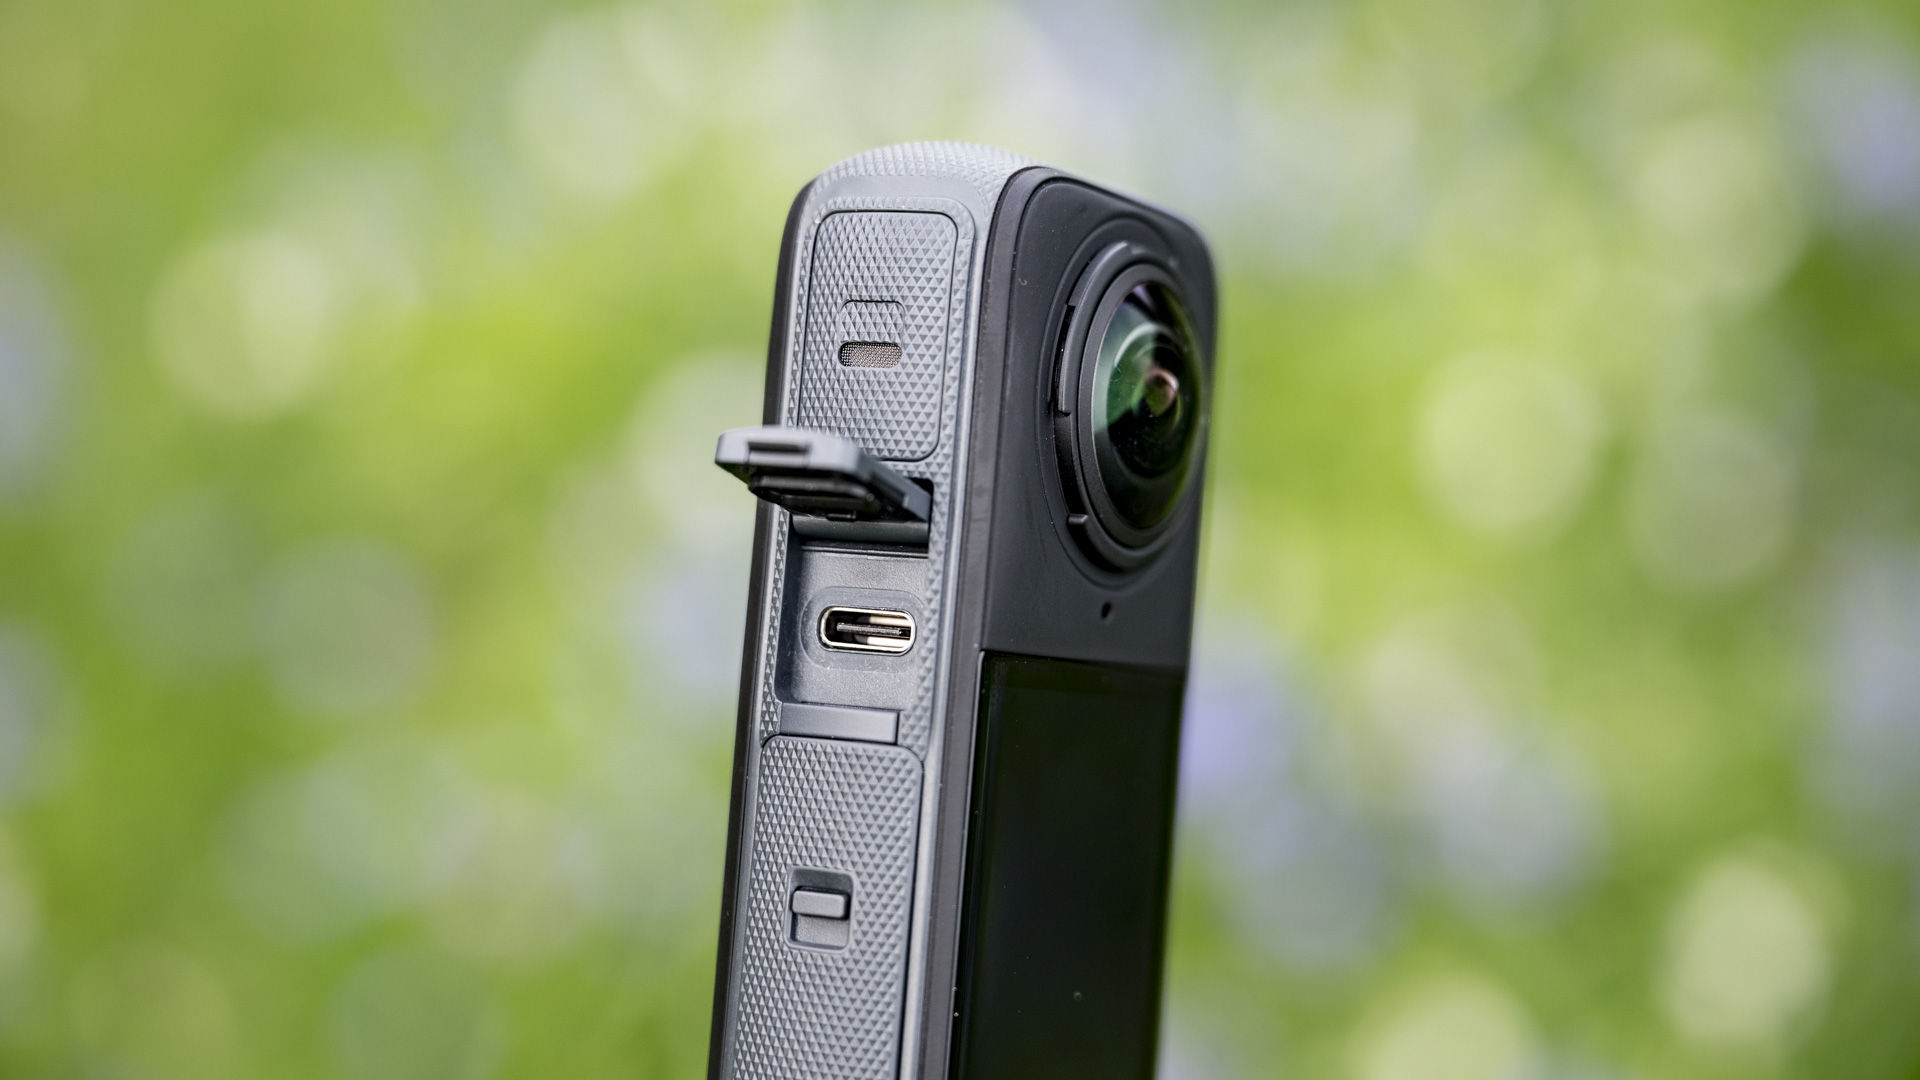 USB-C port of the Insta360 X4 360 degree camera outdoors with vibrant grassy background